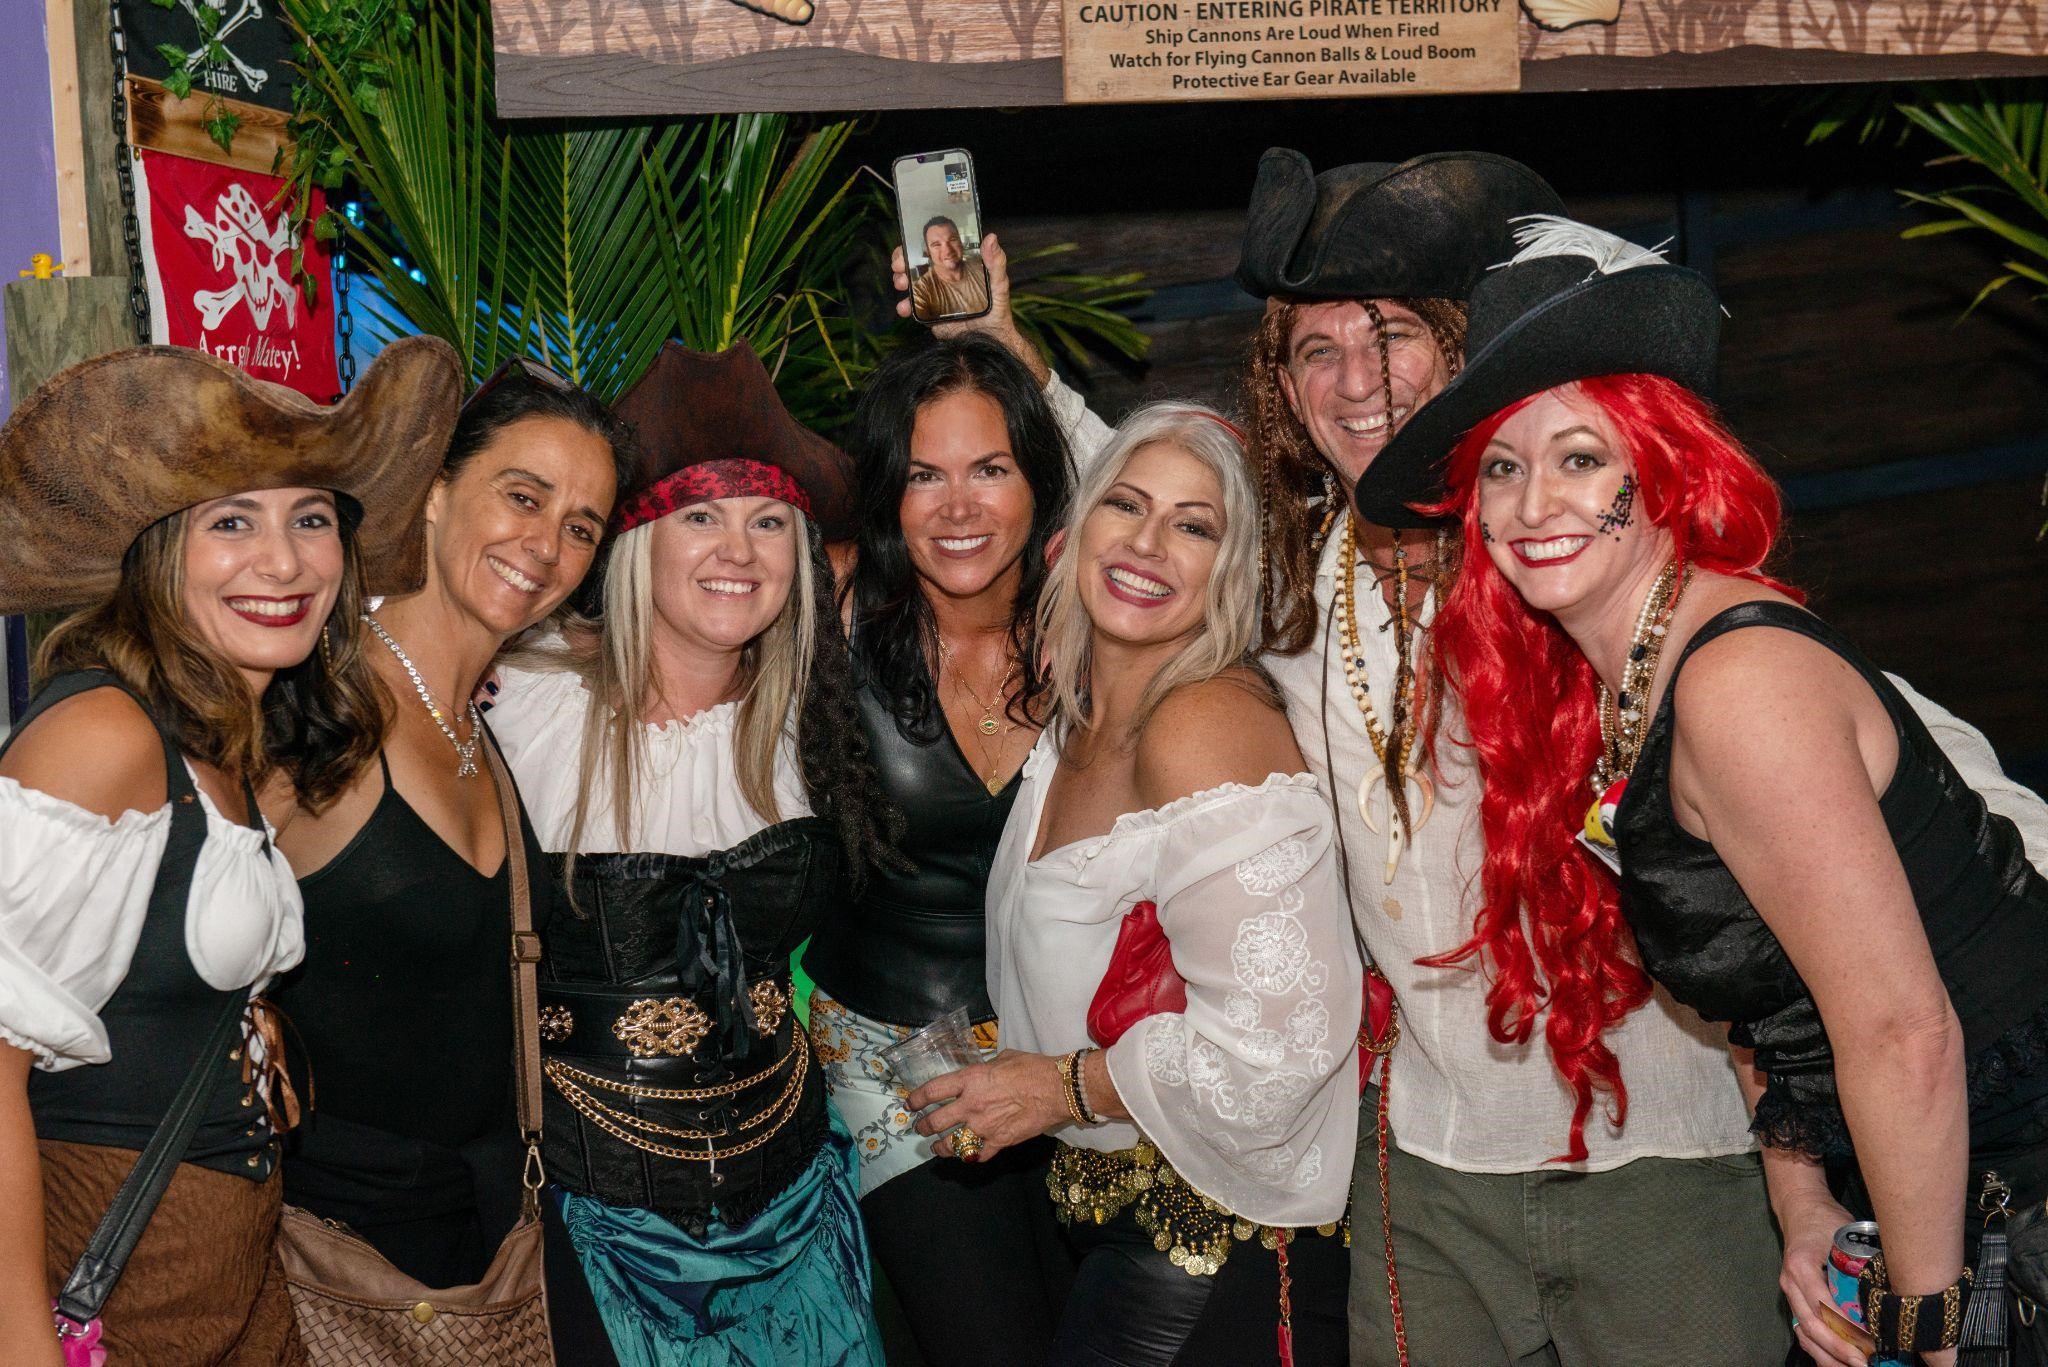 Children’s Museum ShipWrecked Event Raises Funds for New Exhibits!